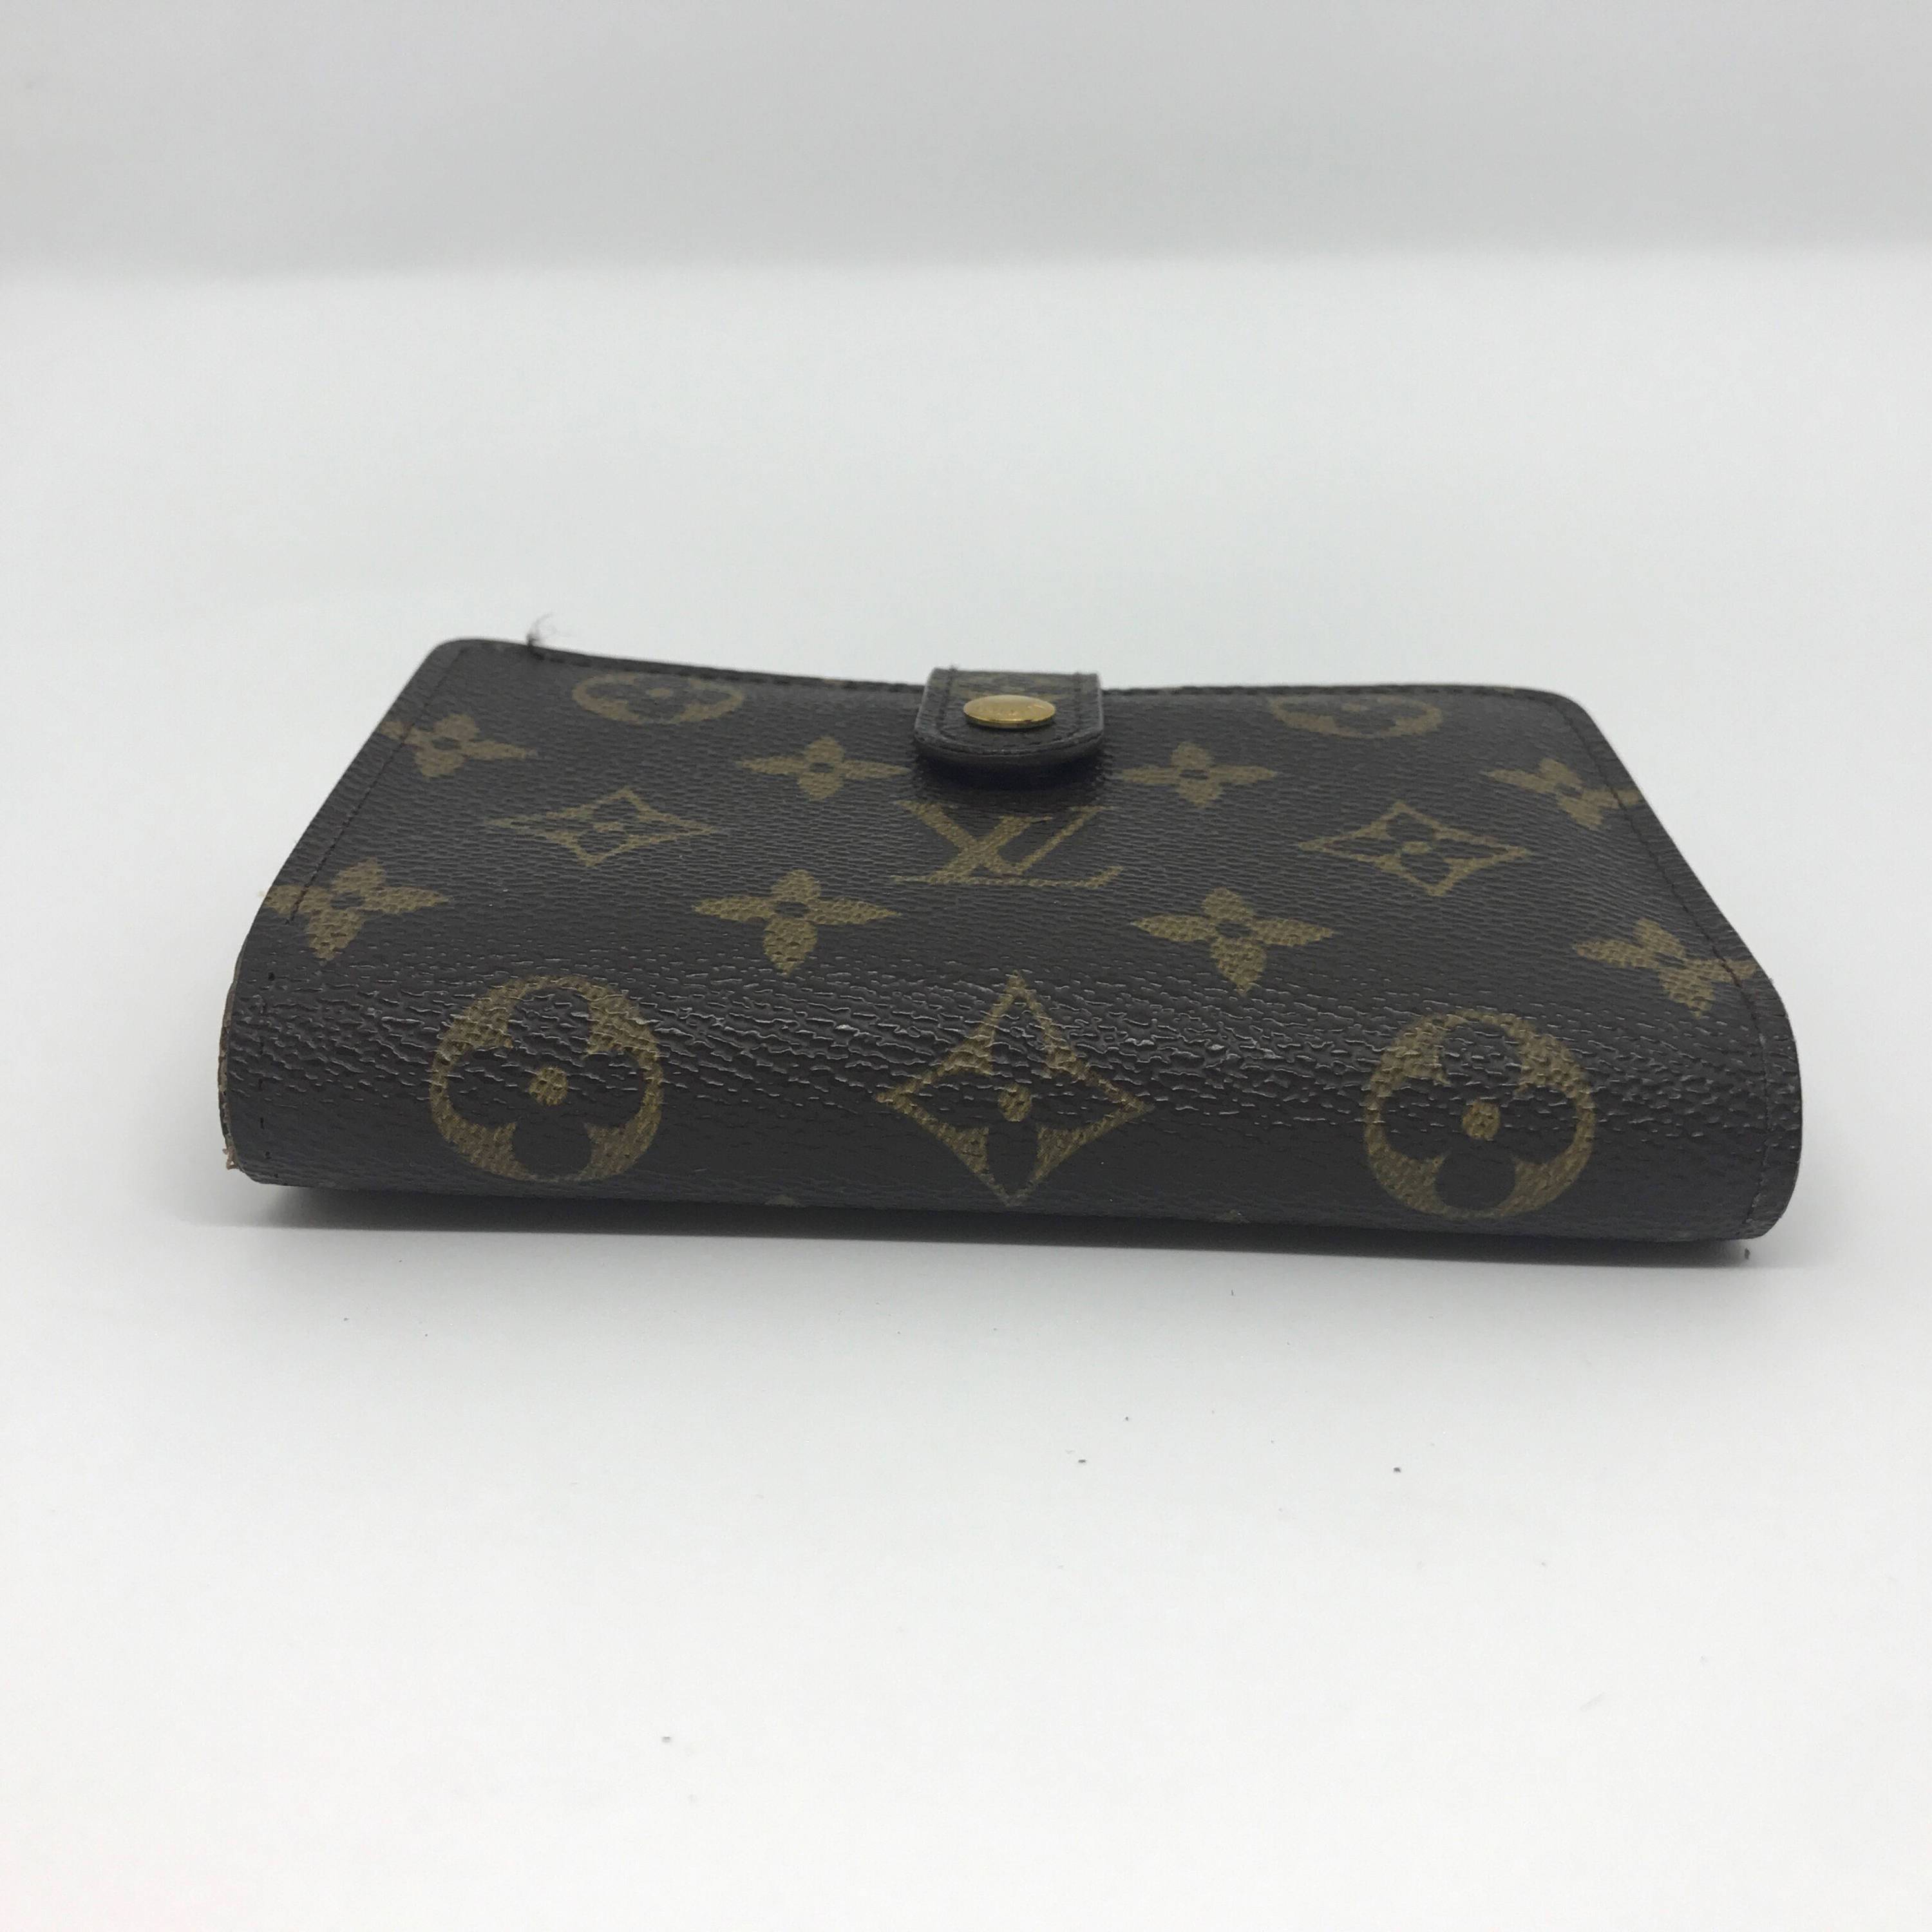 Louis Vuitton Monogram Canvas French Purse Wallet at Jill's Consignment